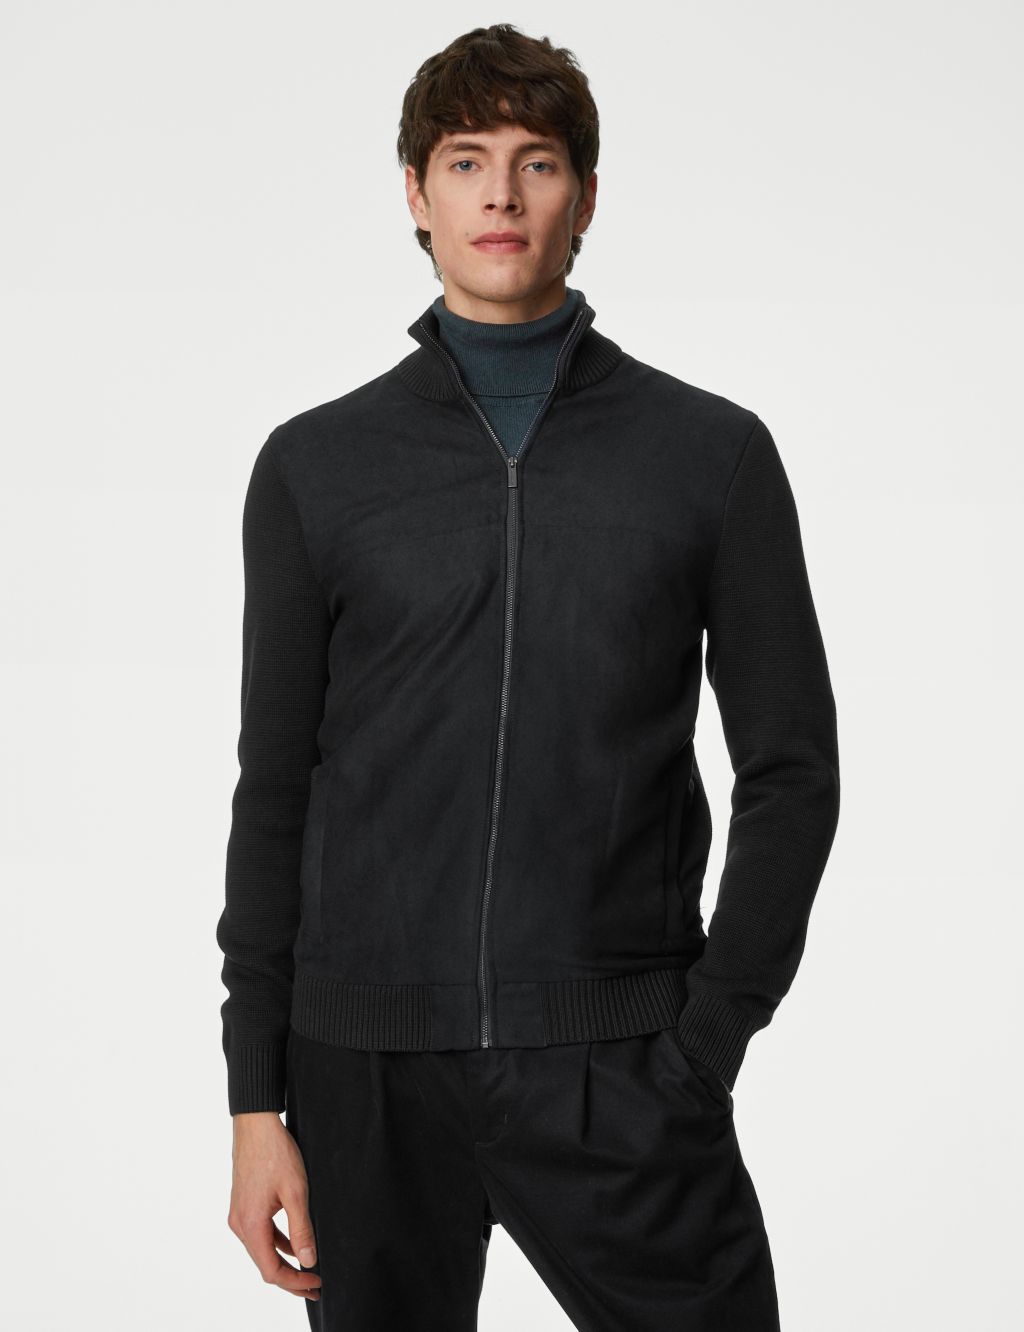 Cotton Rich Zip Up Knitted Jacket | Autograph | M&S